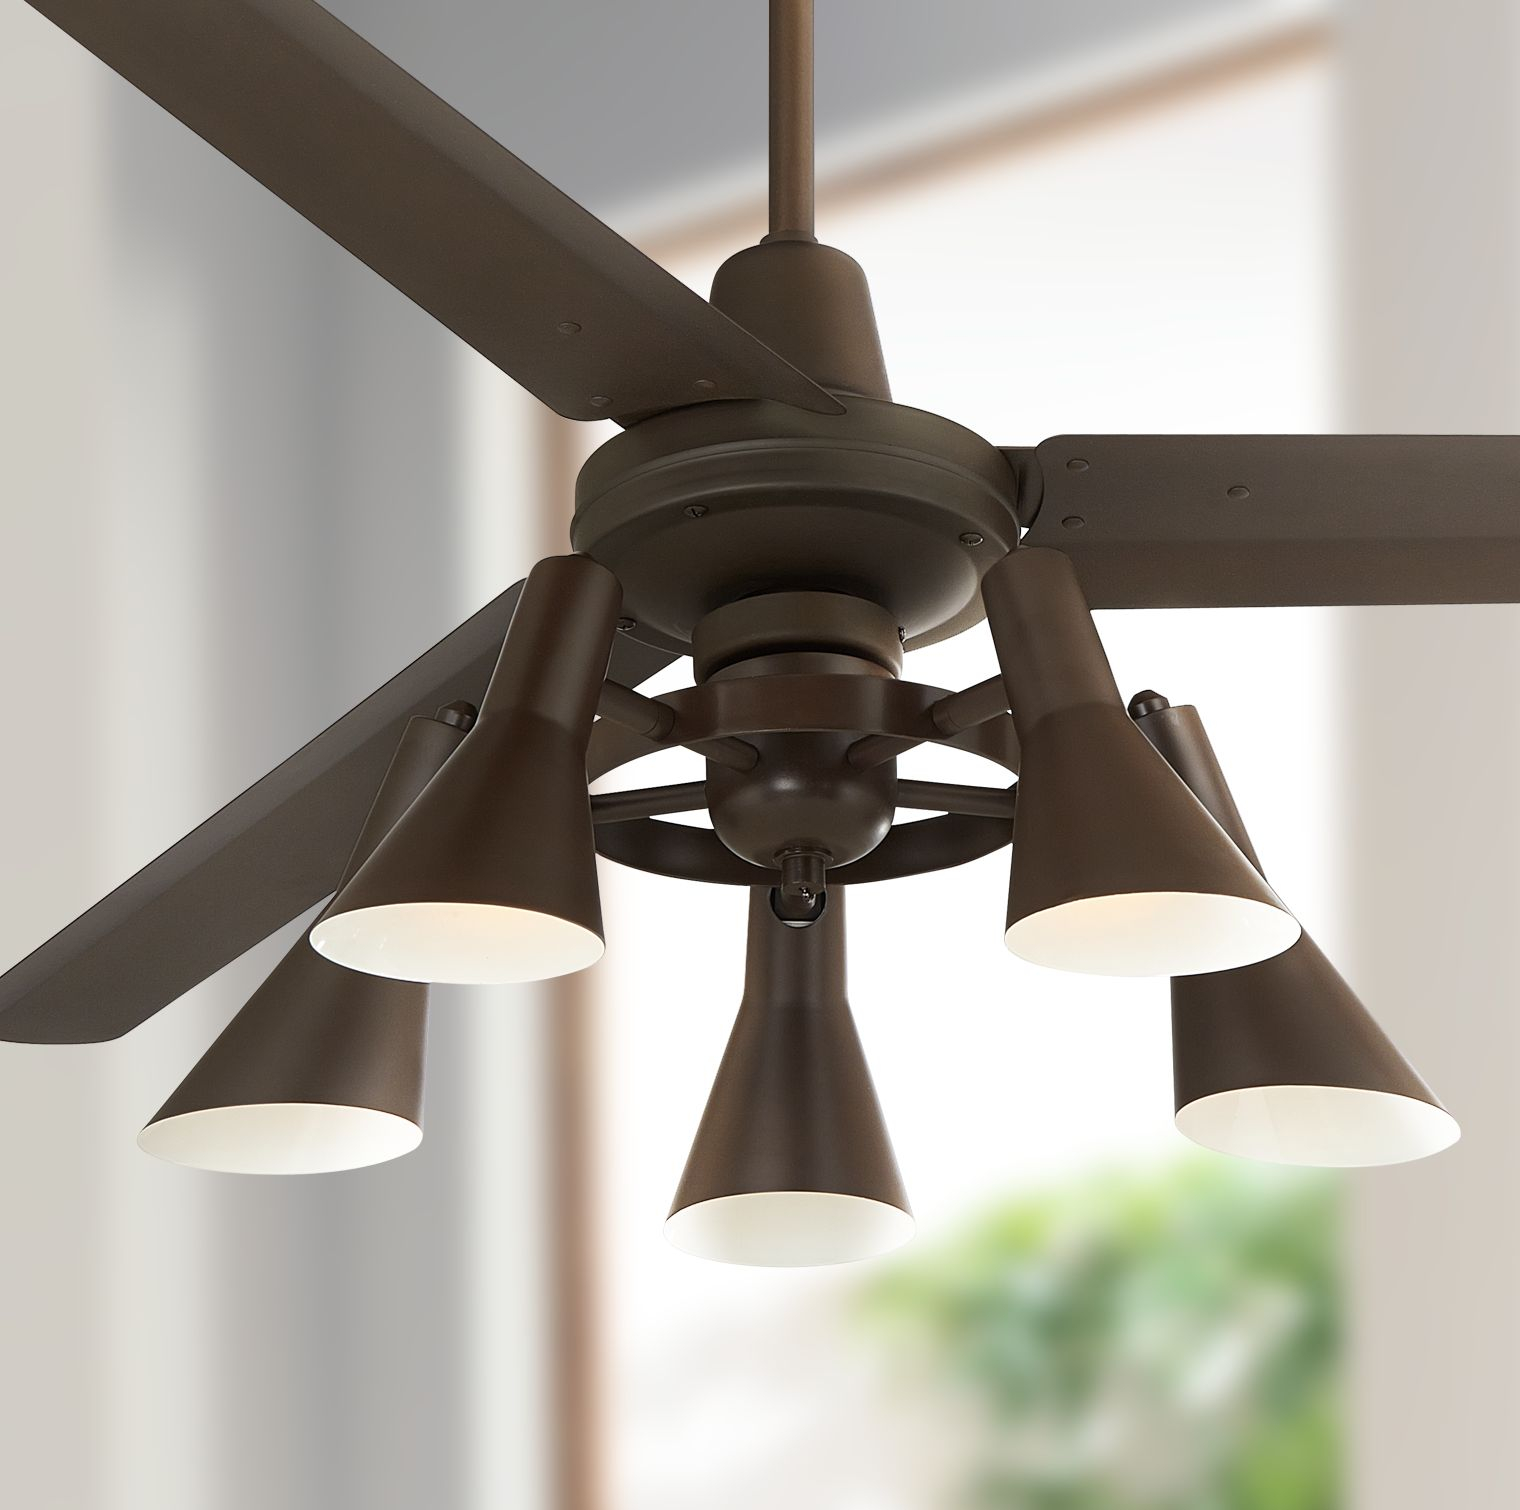 60 Casa Vieja Industrial Retro Ceiling Fan With Light Led Dimmable Remote Oil Rubbed Bronze Adjustable Head For Living Room Walmart within sizing 1520 X 1510